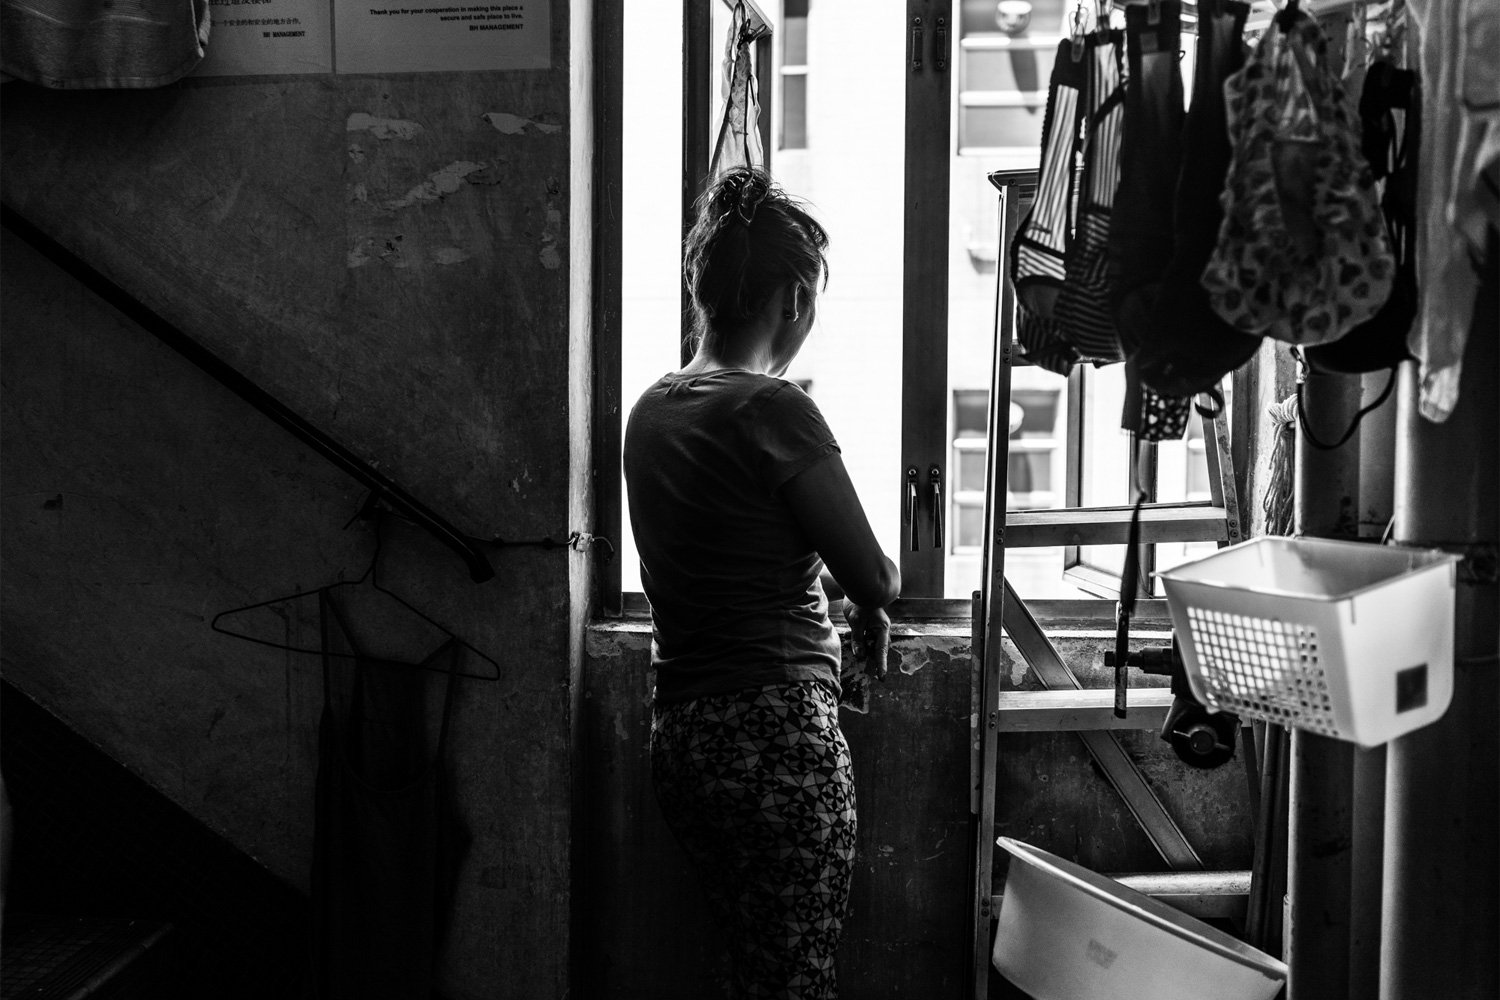 A domestic worker, who requested she not be identified, stands at the back stairway of the shelter. She was fired from her job when she complained about her sleeping situation. She had been made to sleep on the kitchen floor. The shelter is only 900 square feet, and the window in the stairway is one of the only ones in the shelter. The others are in the toilet.